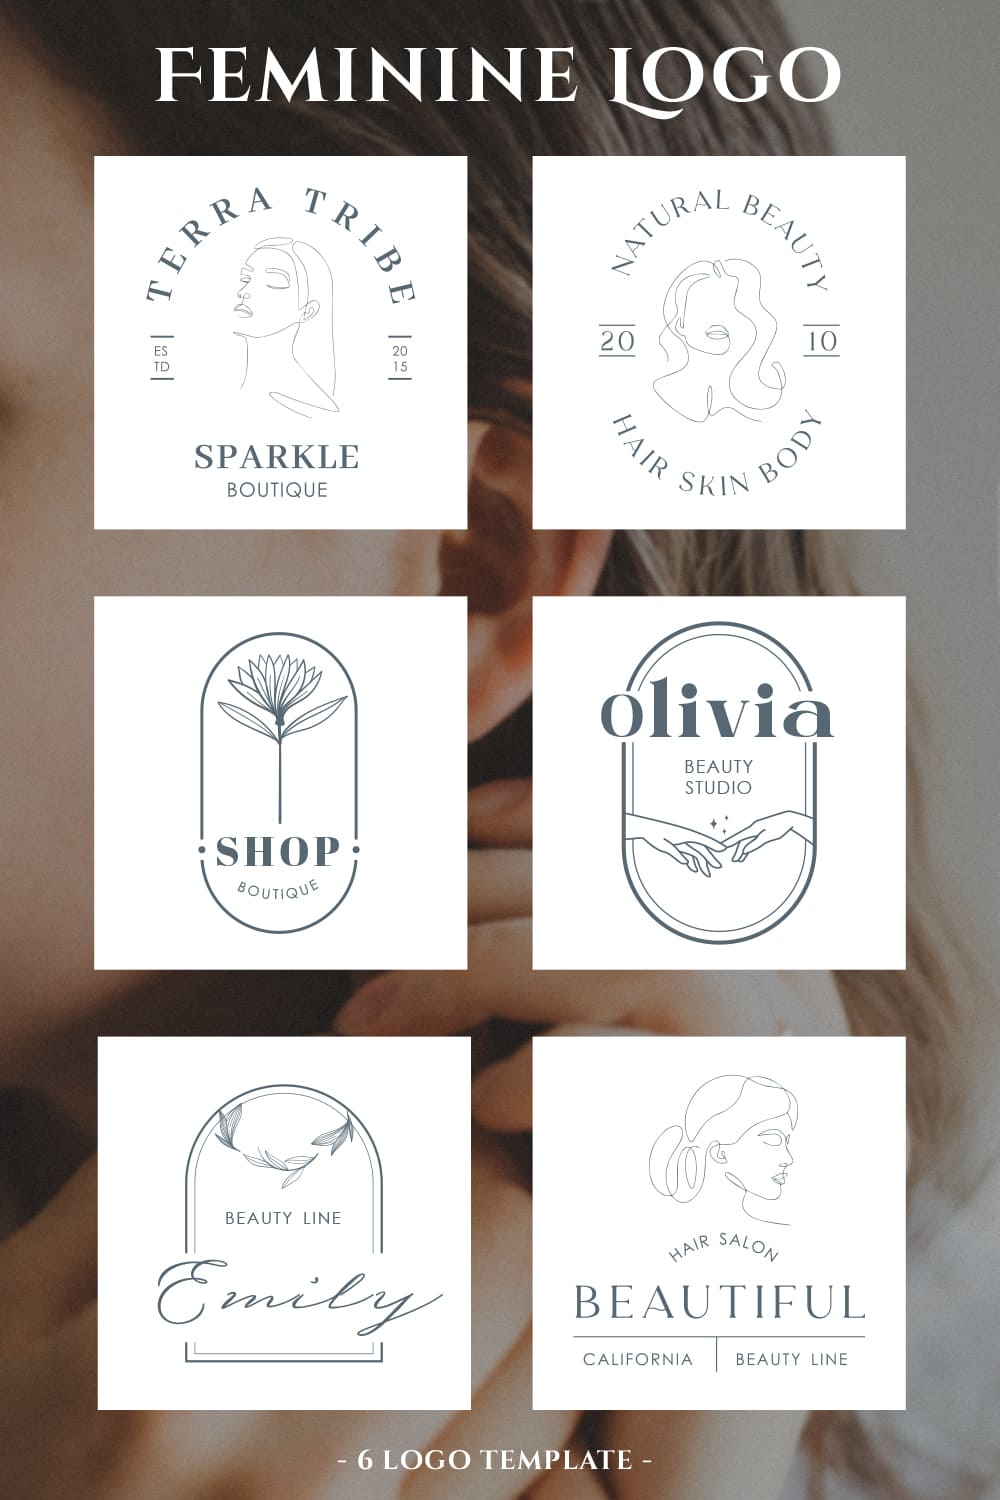 So delicate and simple logos for different purposes.